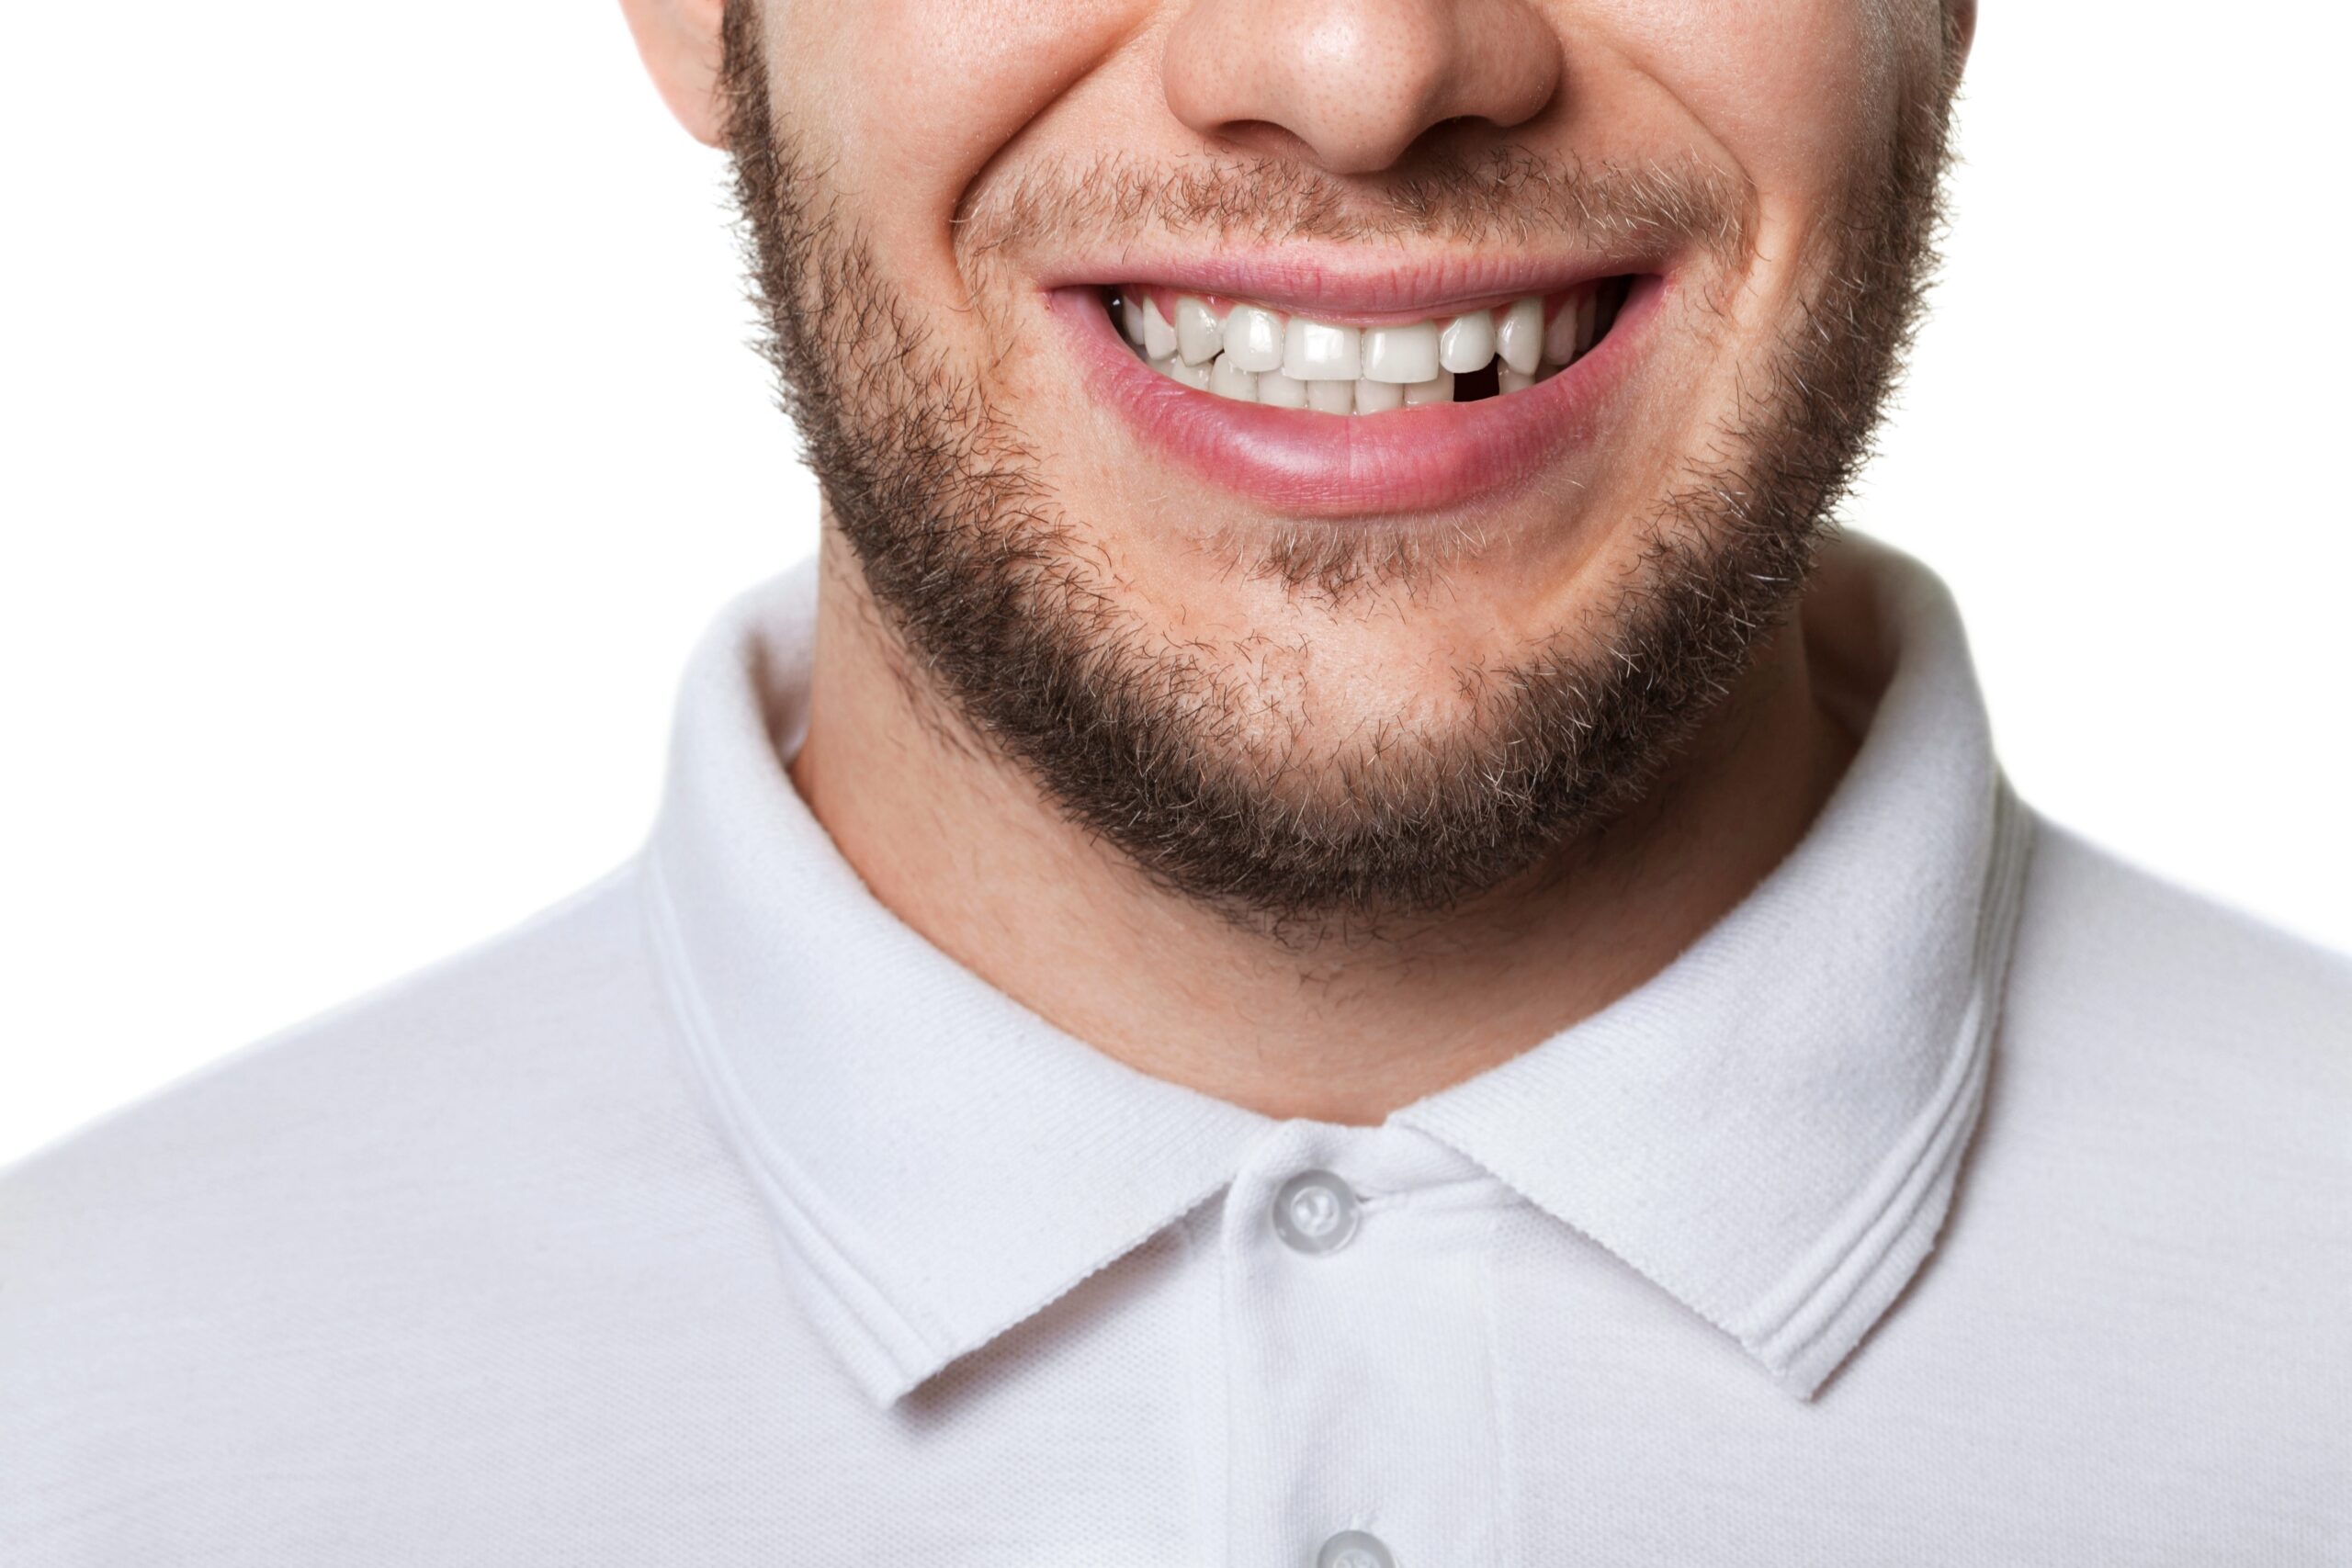 4 Reasons to Replace Missing Teeth